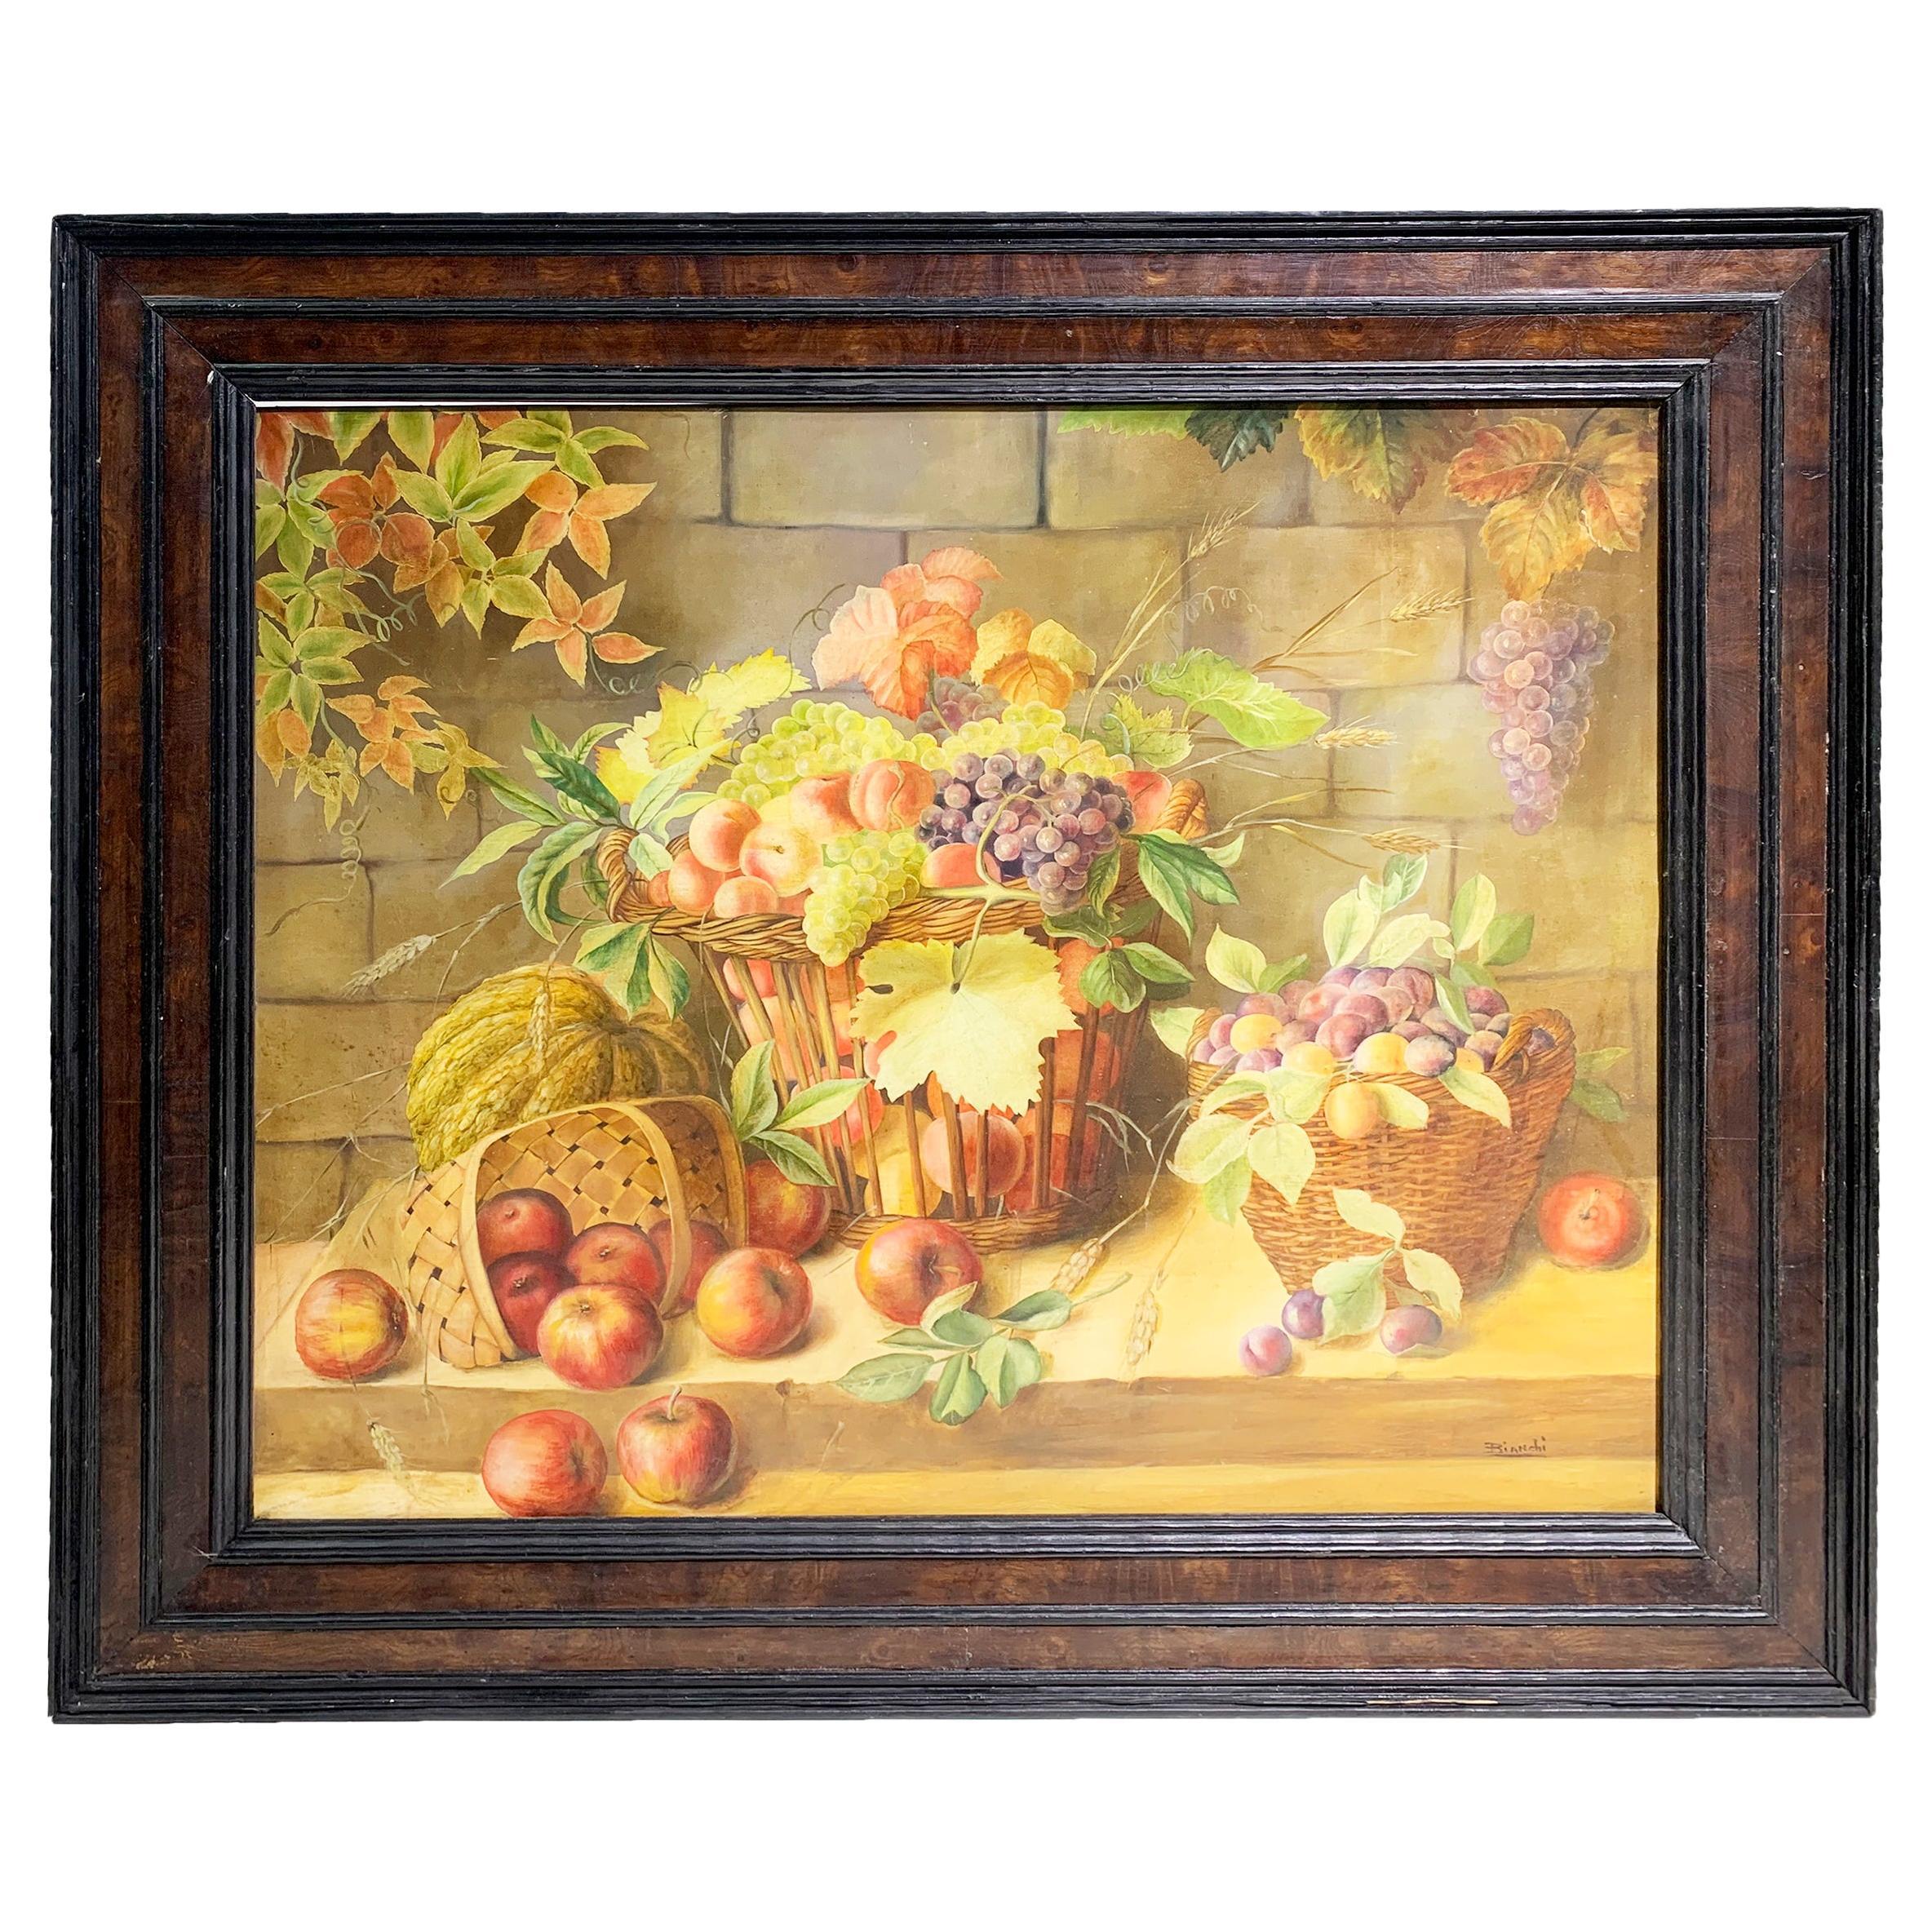 19th Century Still Life Wooden Framed Painting / Oil on Canvas, Signed Bianchi